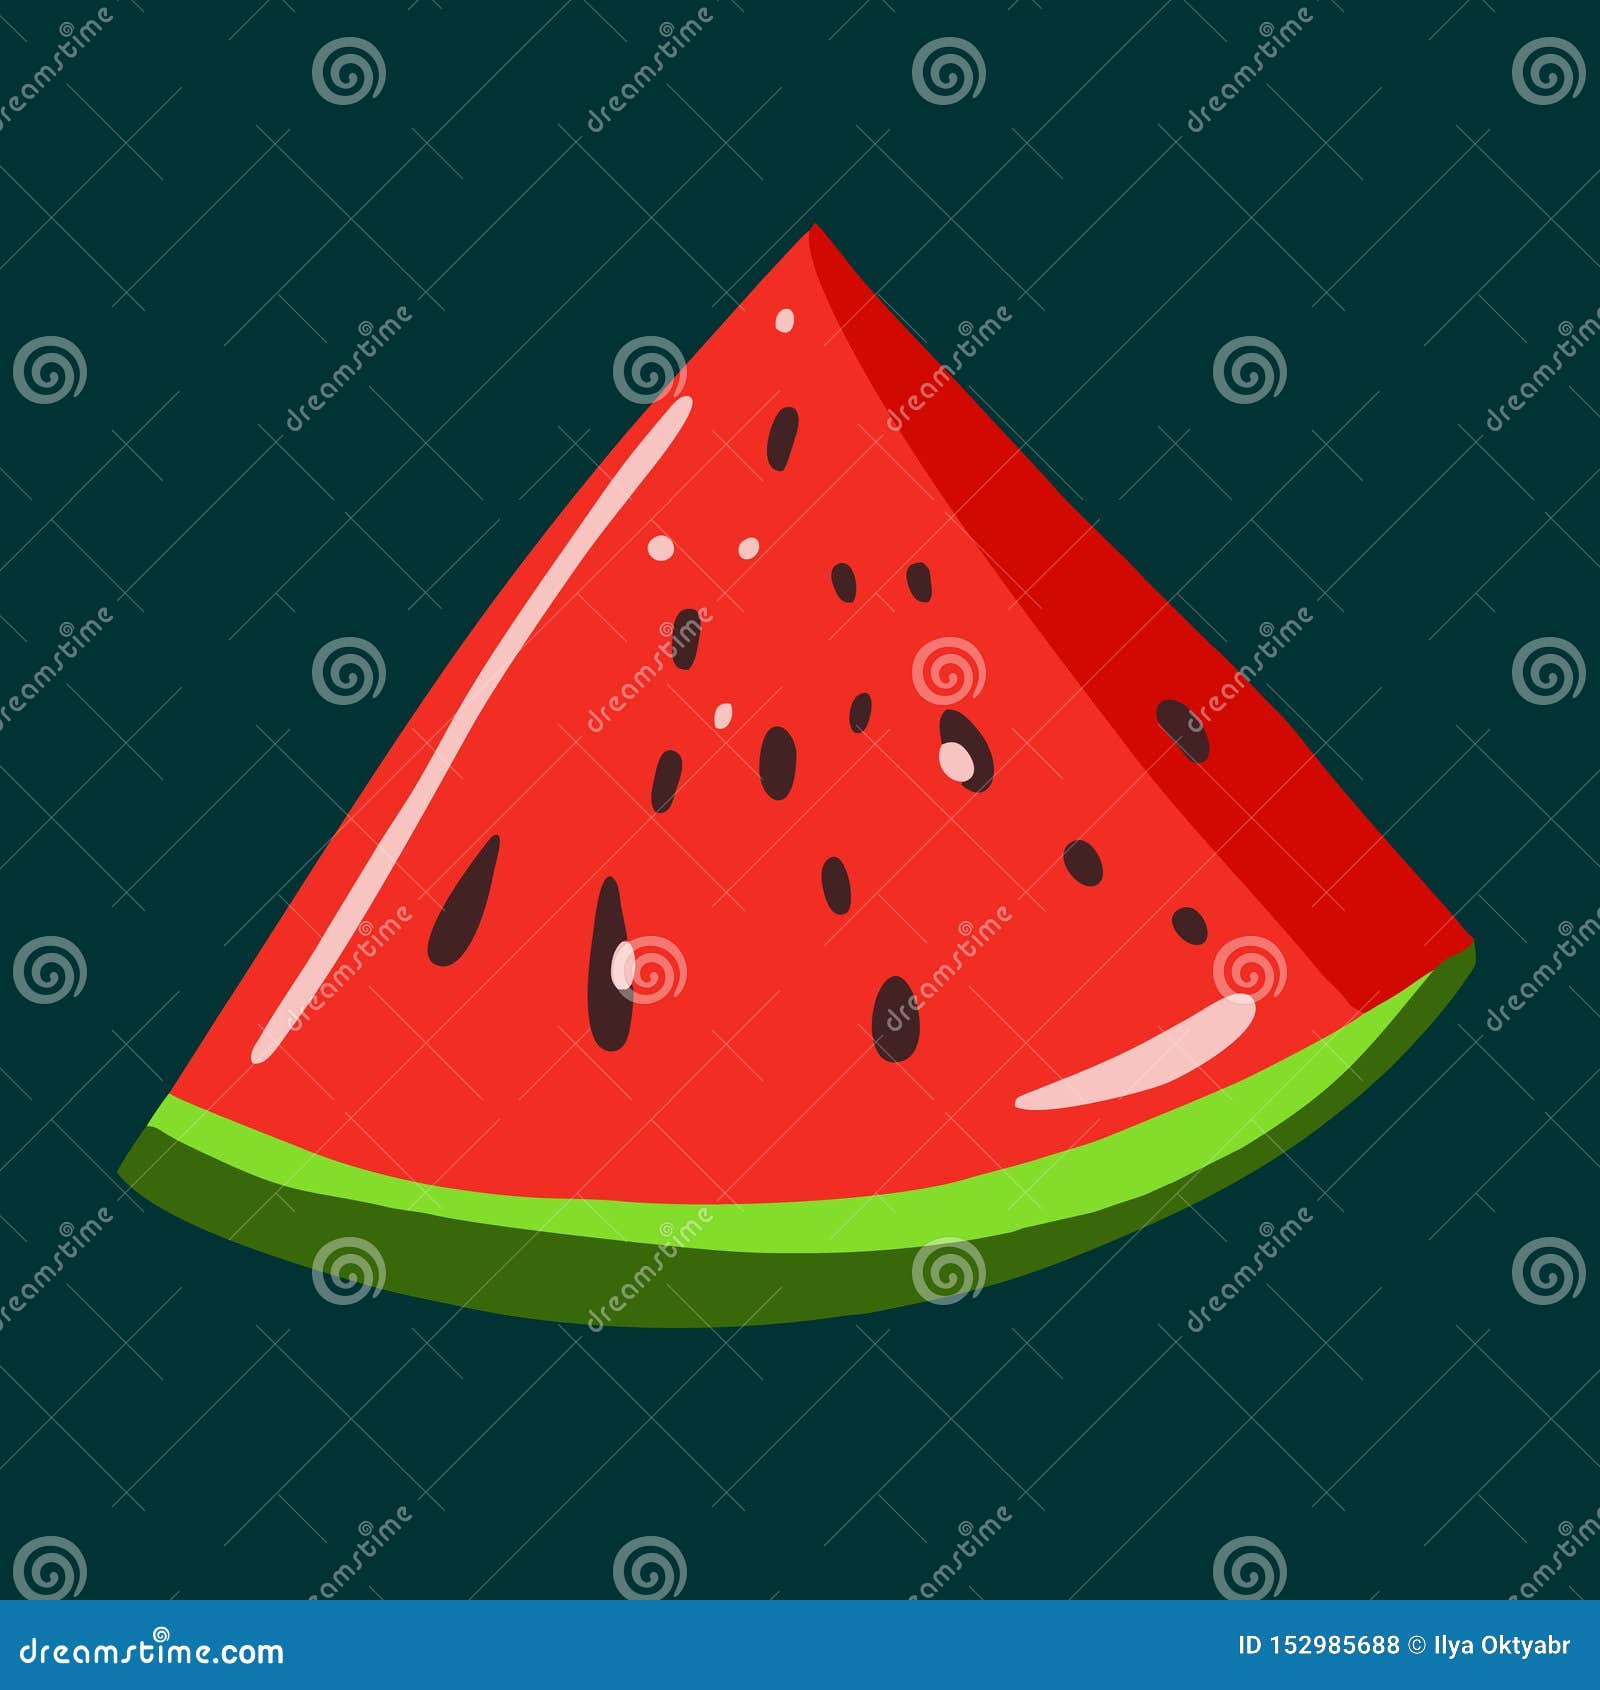 Unique Hsnd Draw Sketch One Slice Of Watermelon for Kids